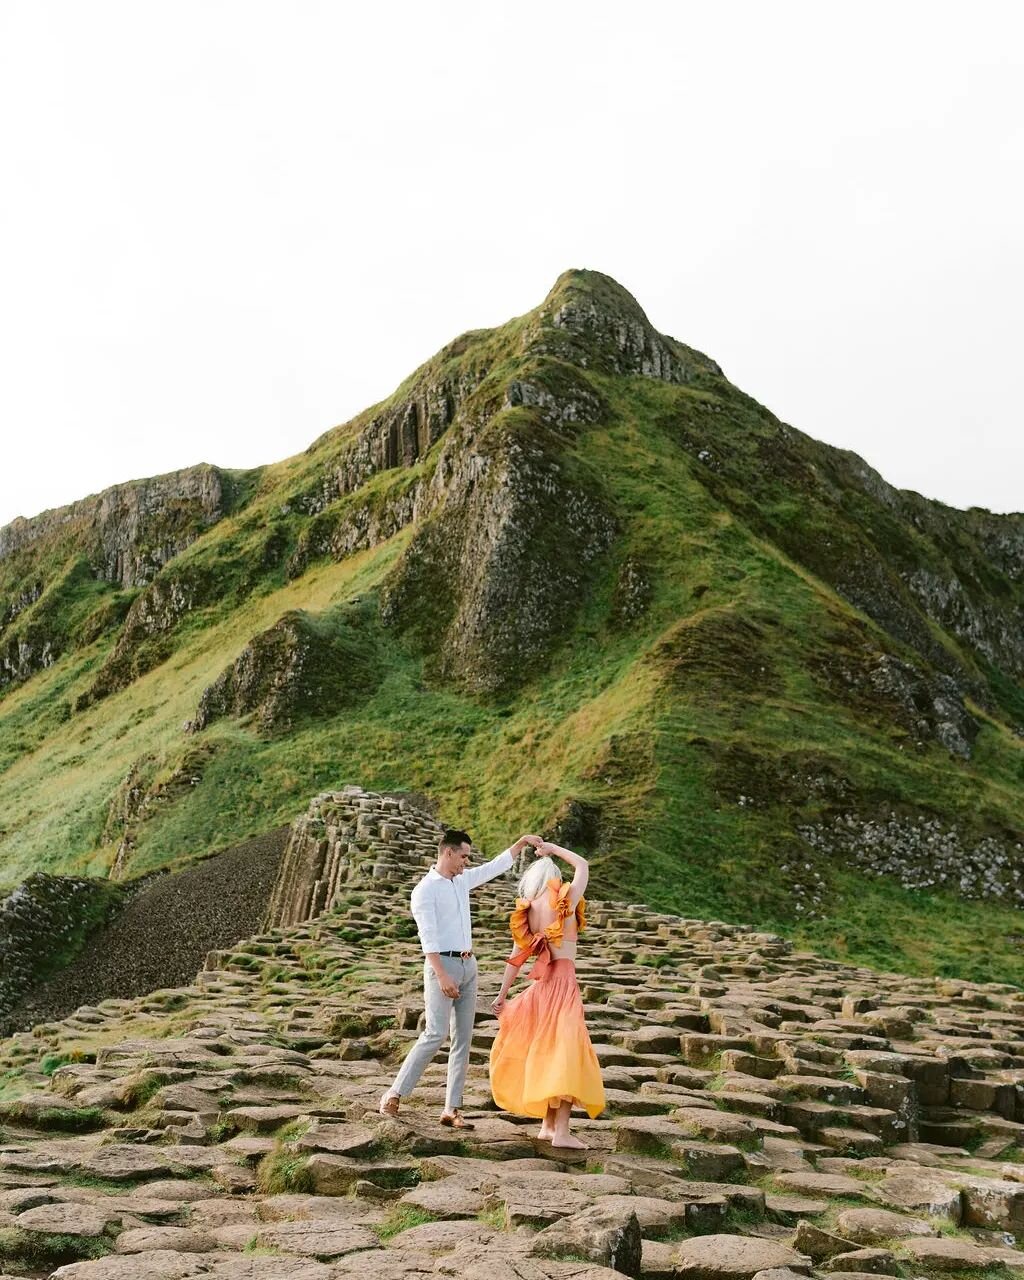 If you're looking for a wedding destination that's both breathtakingly beautiful and steeped in history and culture, Northern Ireland is the perfect choice. From its stunning coastal scenery to its charming towns and cities, this magical corner of th